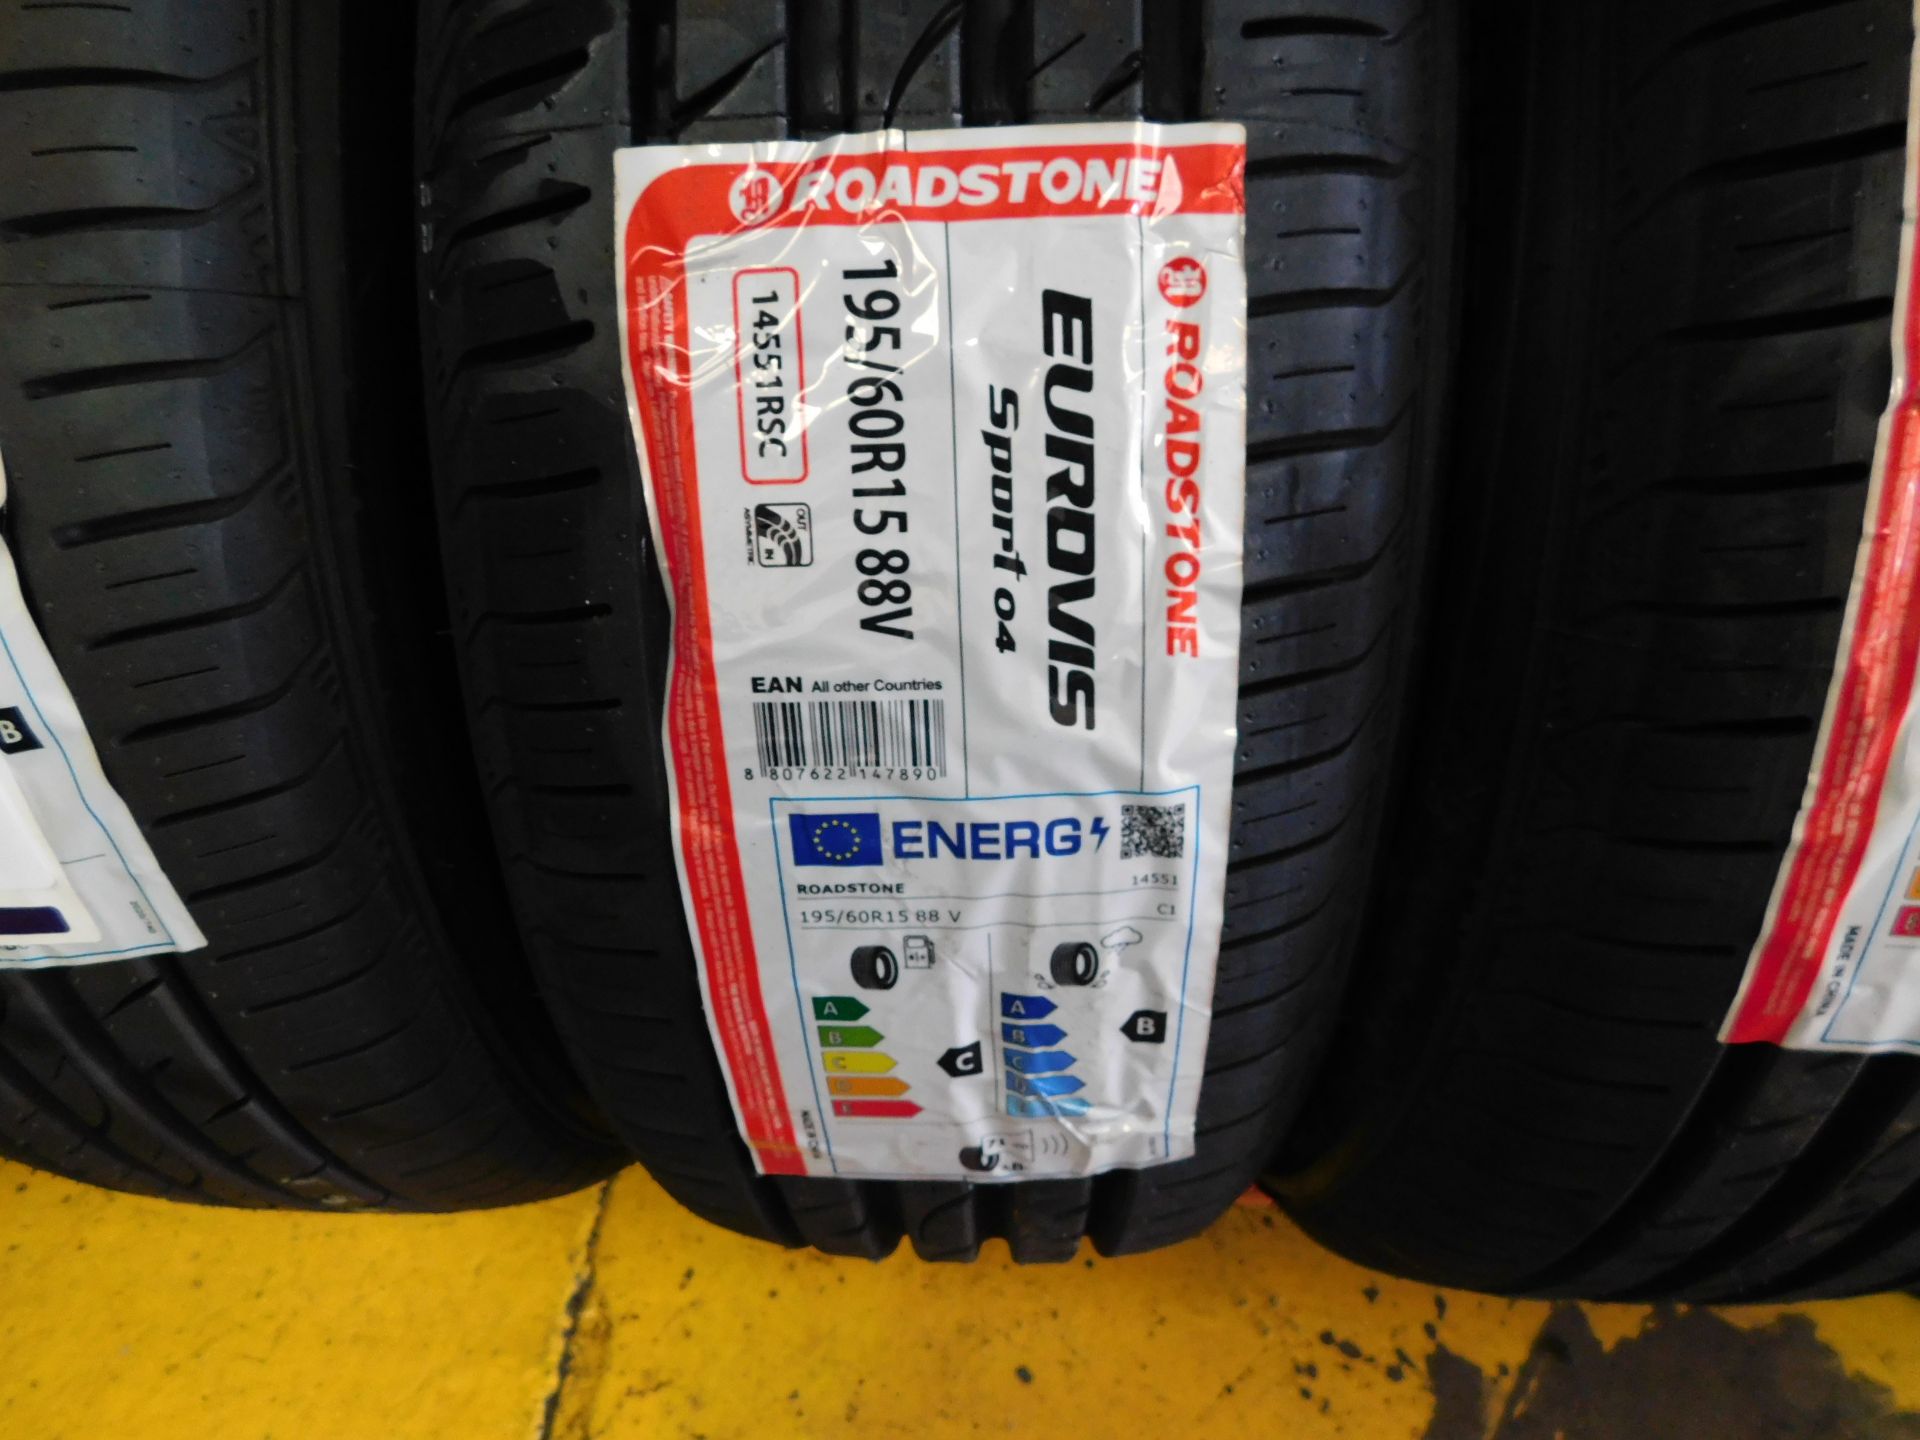 6 tyres, size 195/60 15 (6 Roadstone) (Location Northampton. Please Refer to General Notes) - Image 2 of 2